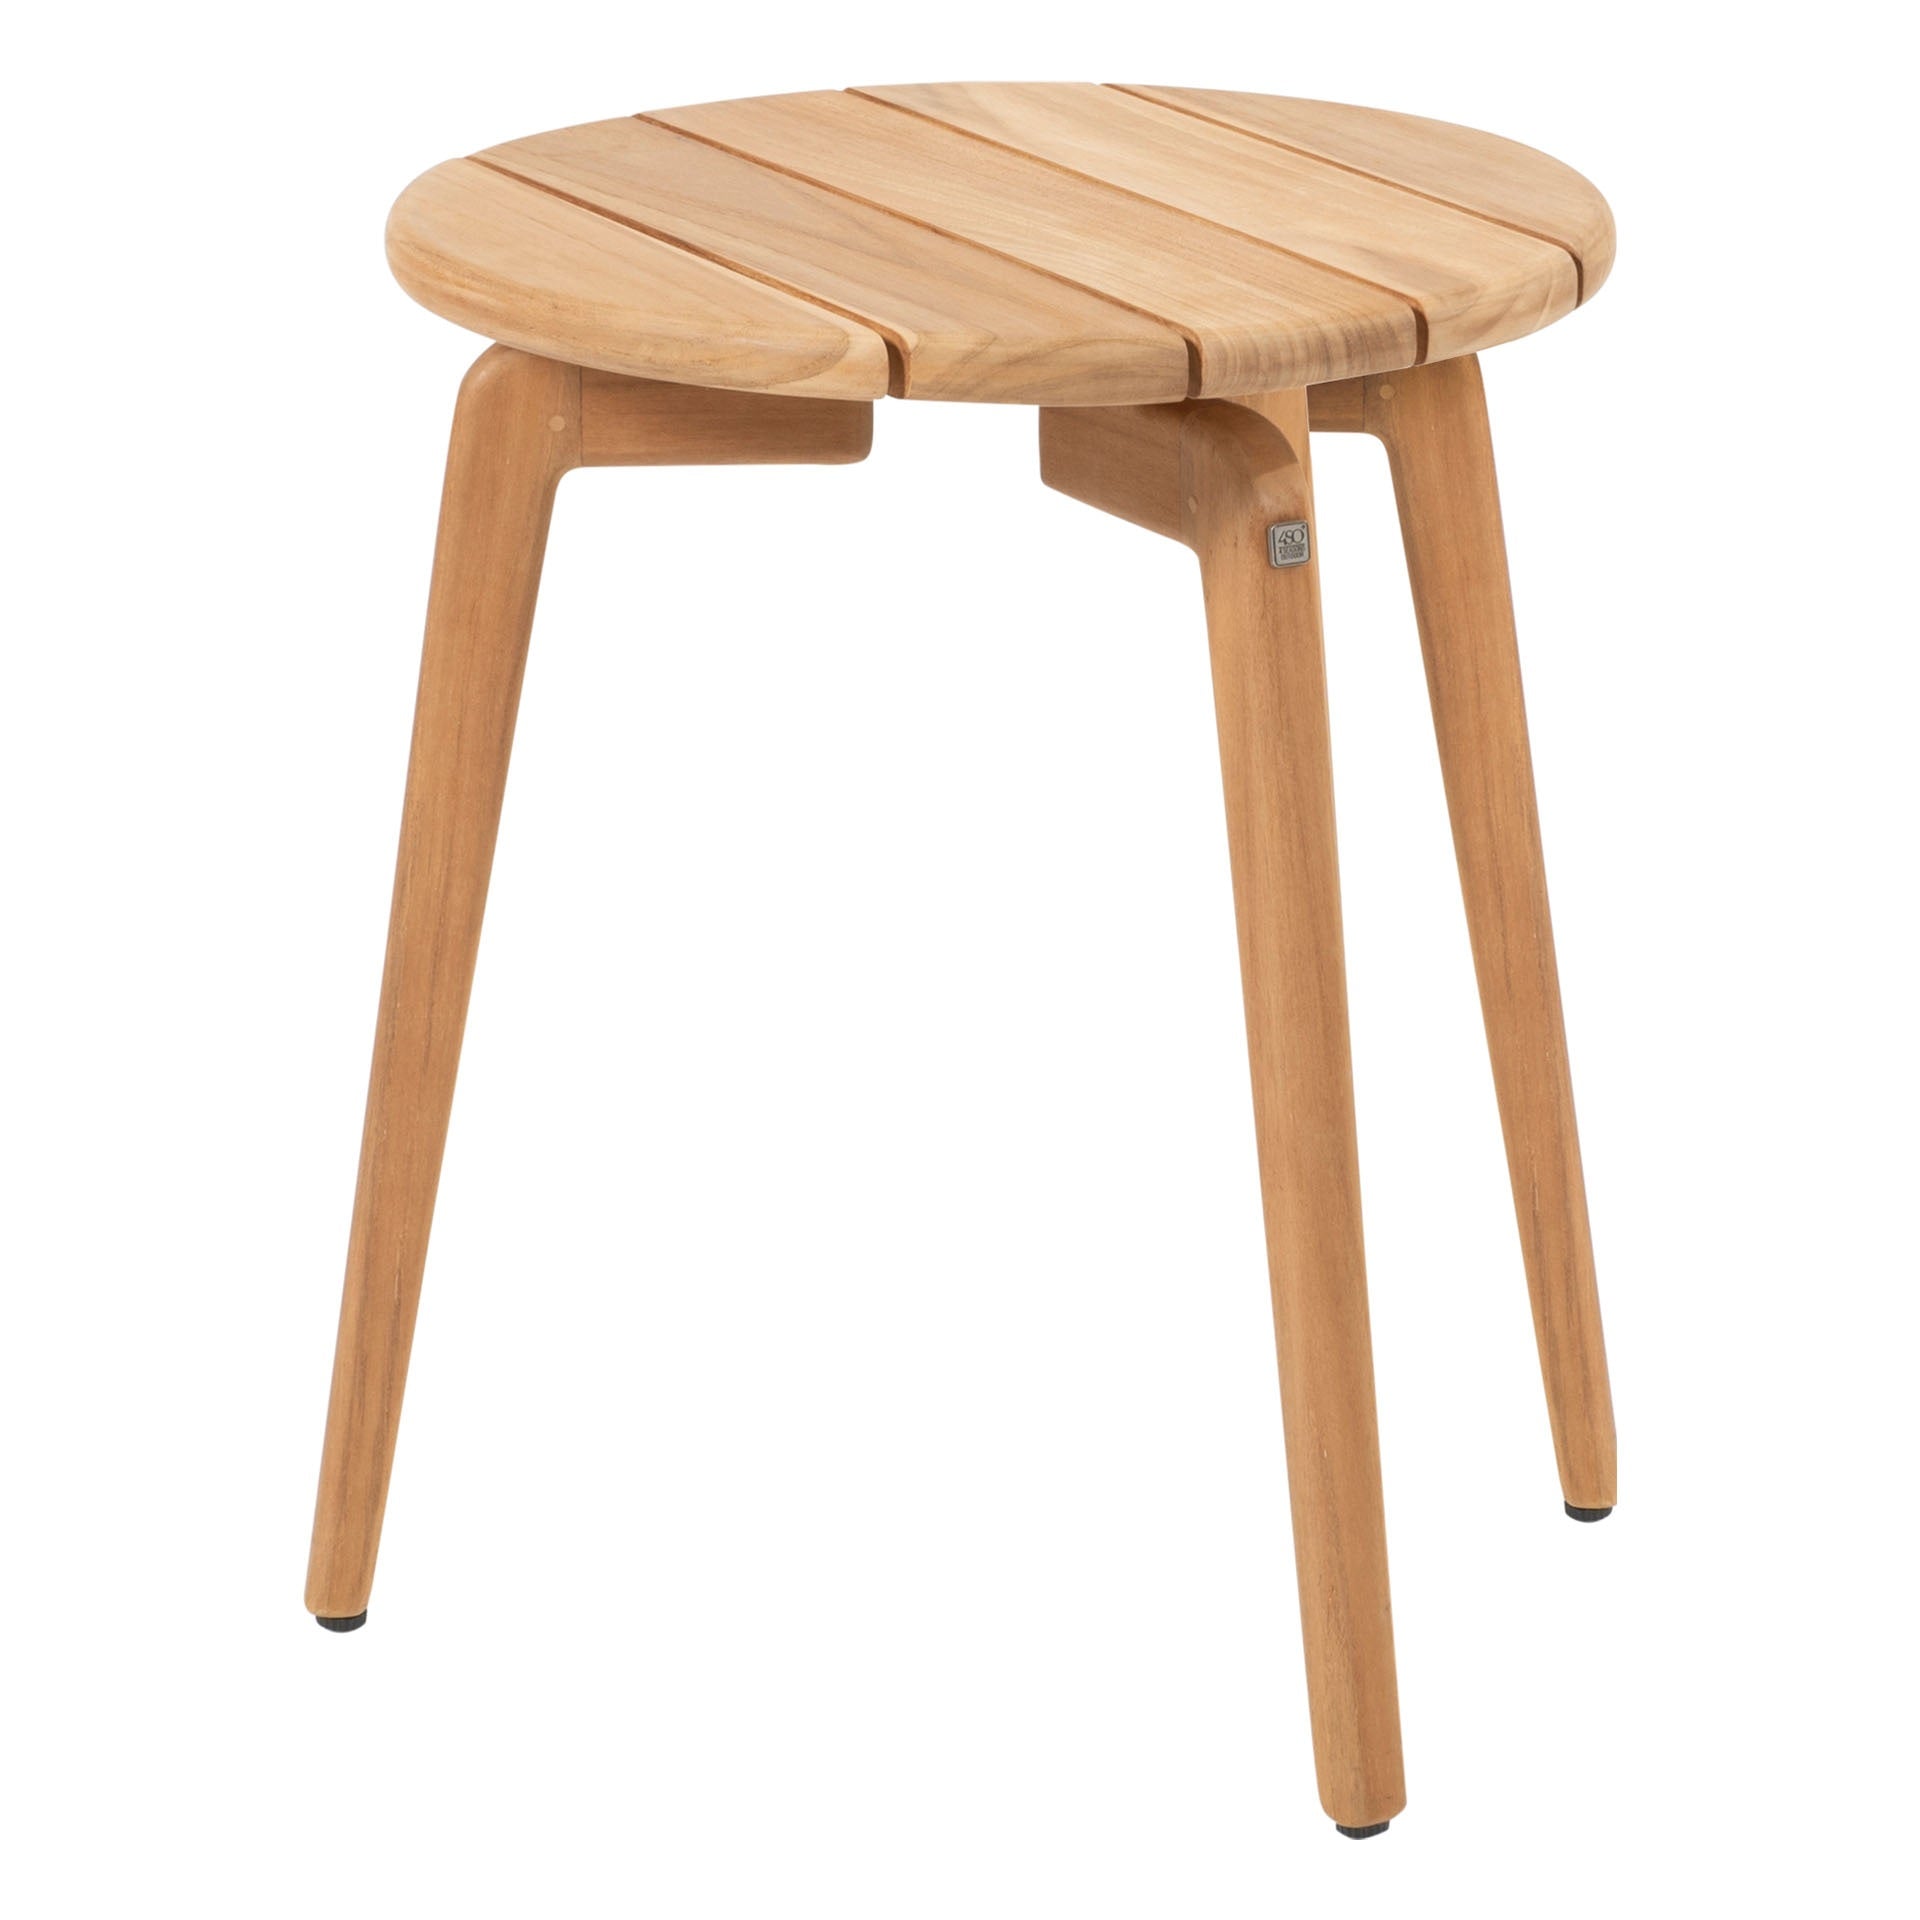 Puccini / Zucca Outdoor Teak Side Table by 4 Seasons Outdoor